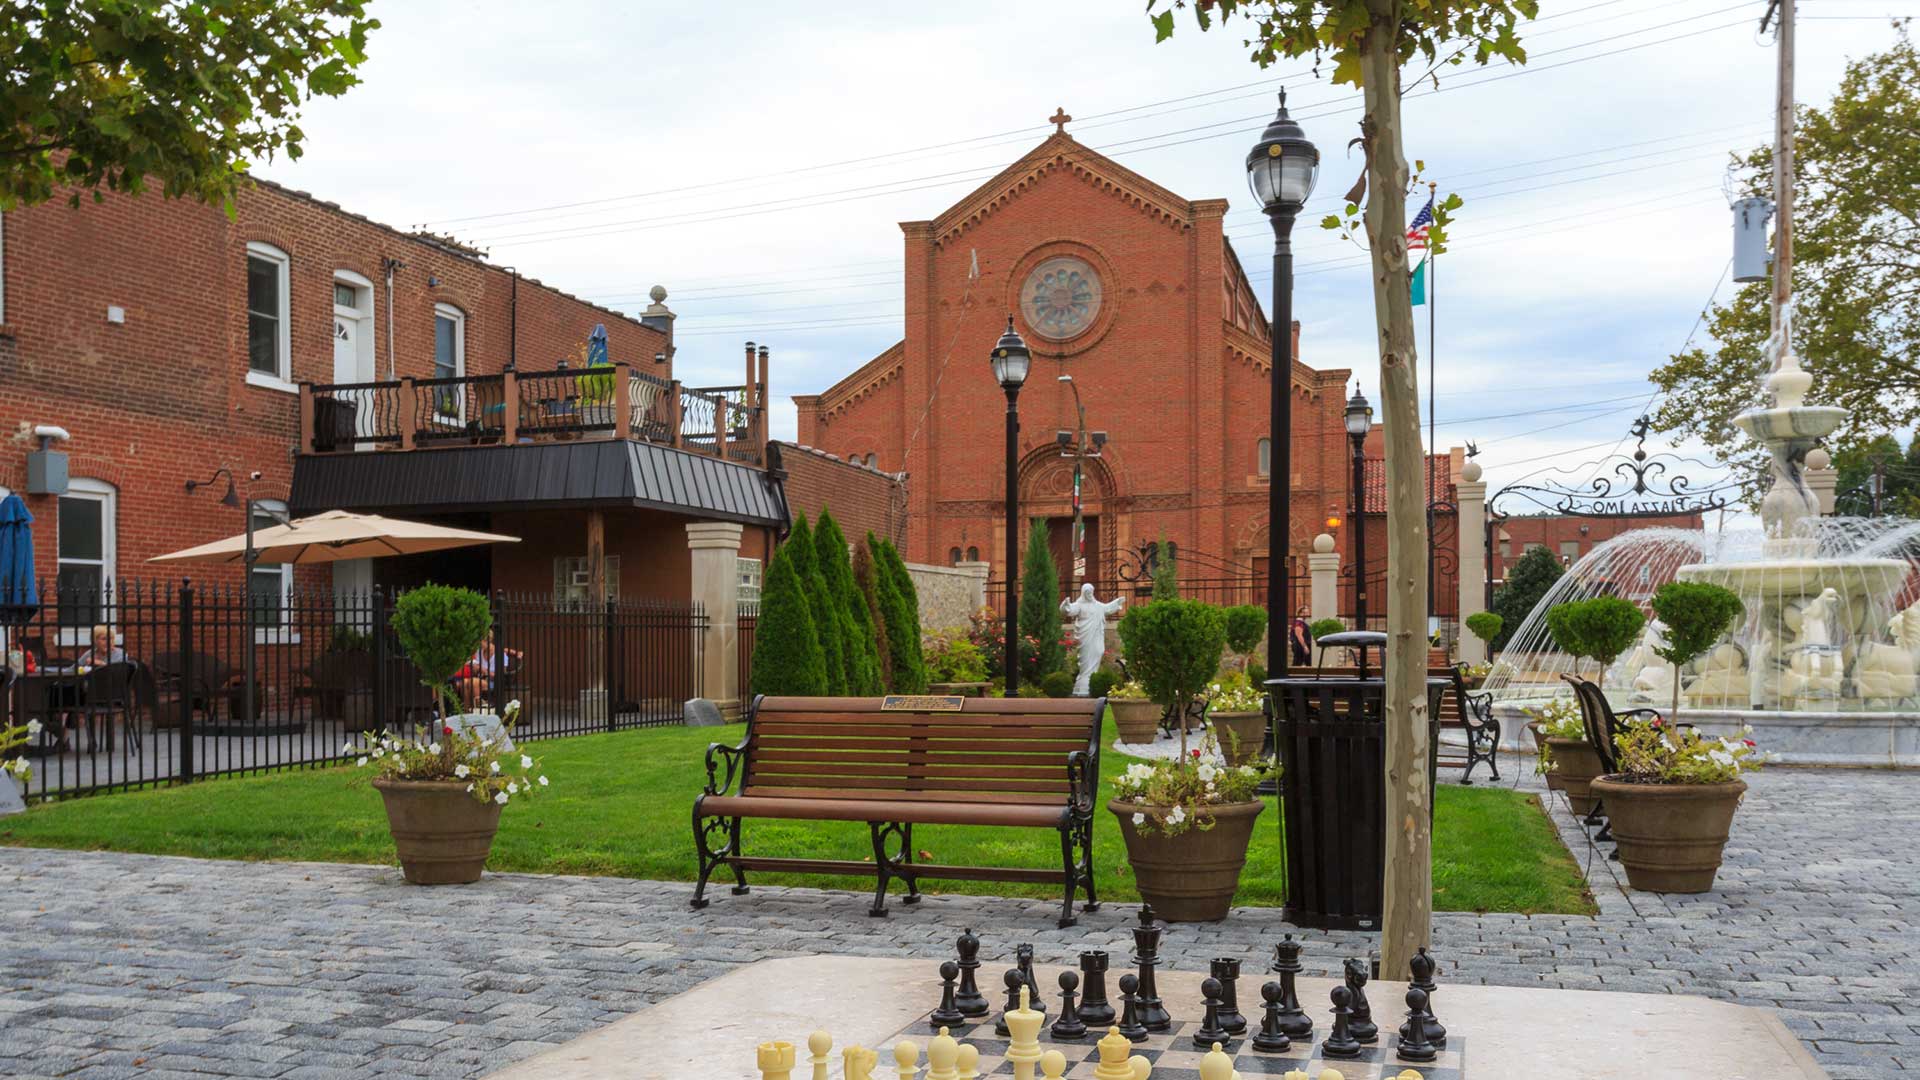 A chess board in a park with a fountain in the background and a red brick church further behind.